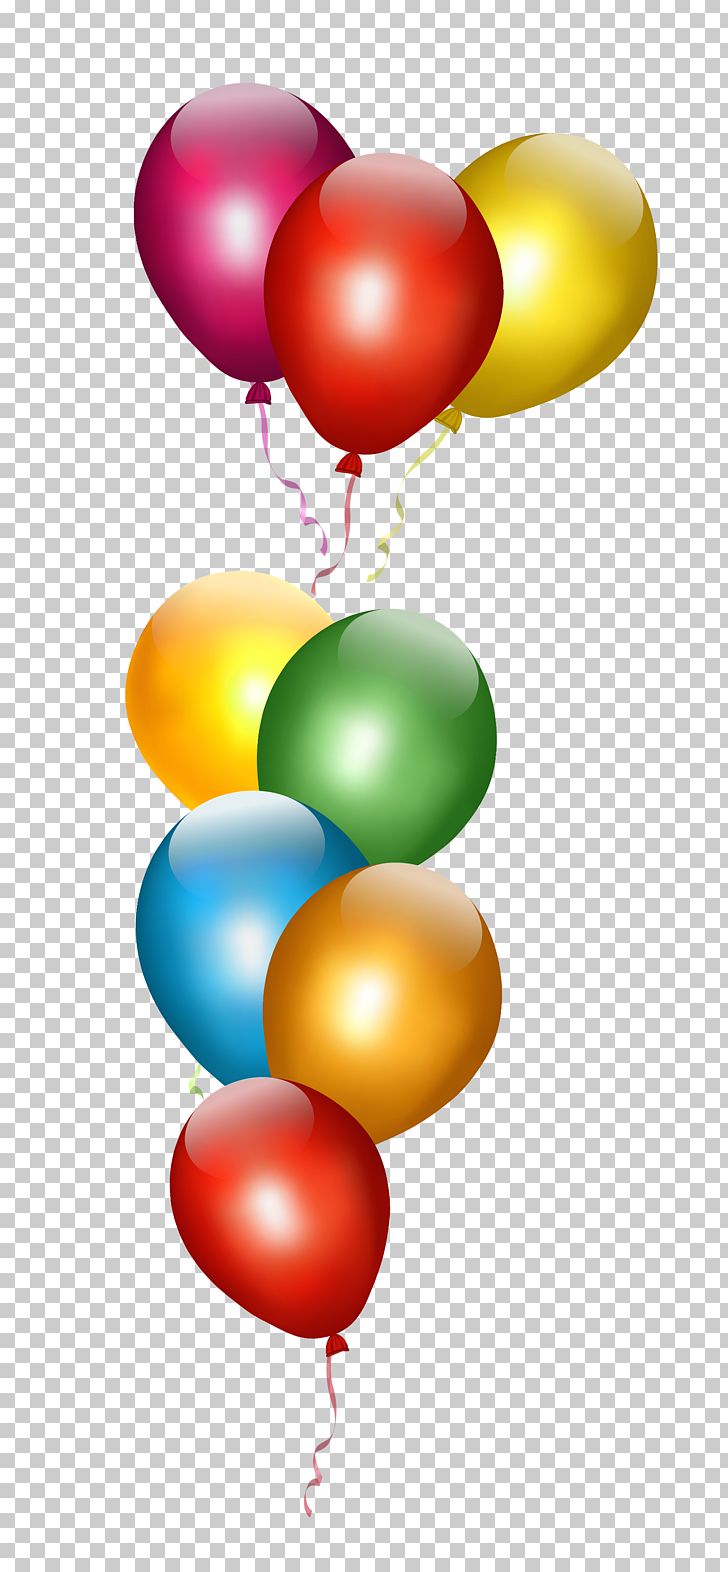 Party Toy Balloon Birthday Gift PNG, Clipart, Balloon, Balloons, Birthday, Clipart, Gift Free PNG Download